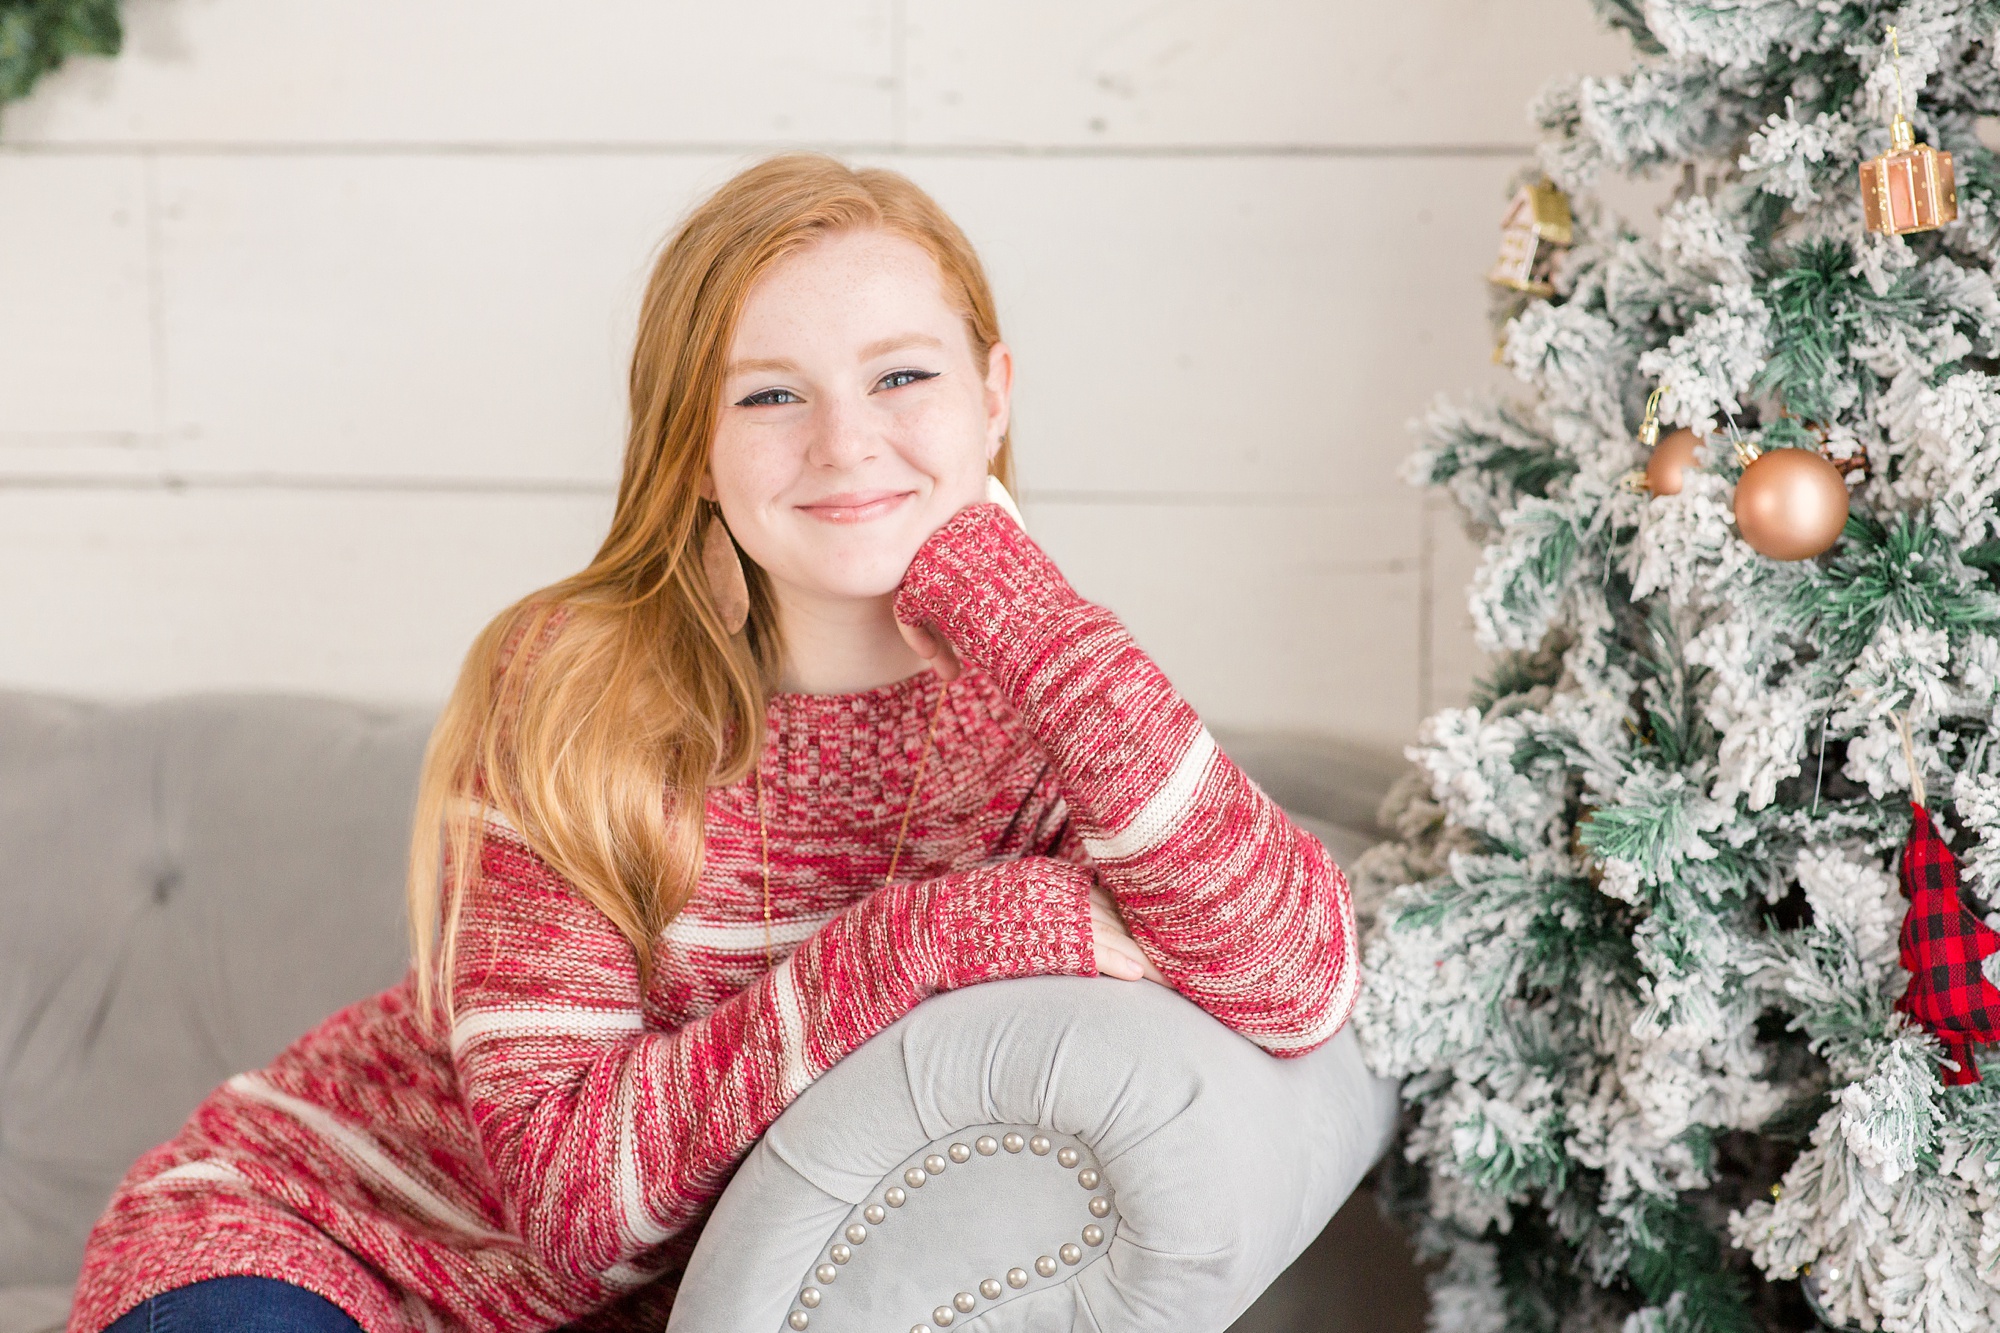 teenager poses on couch by Christmas tree